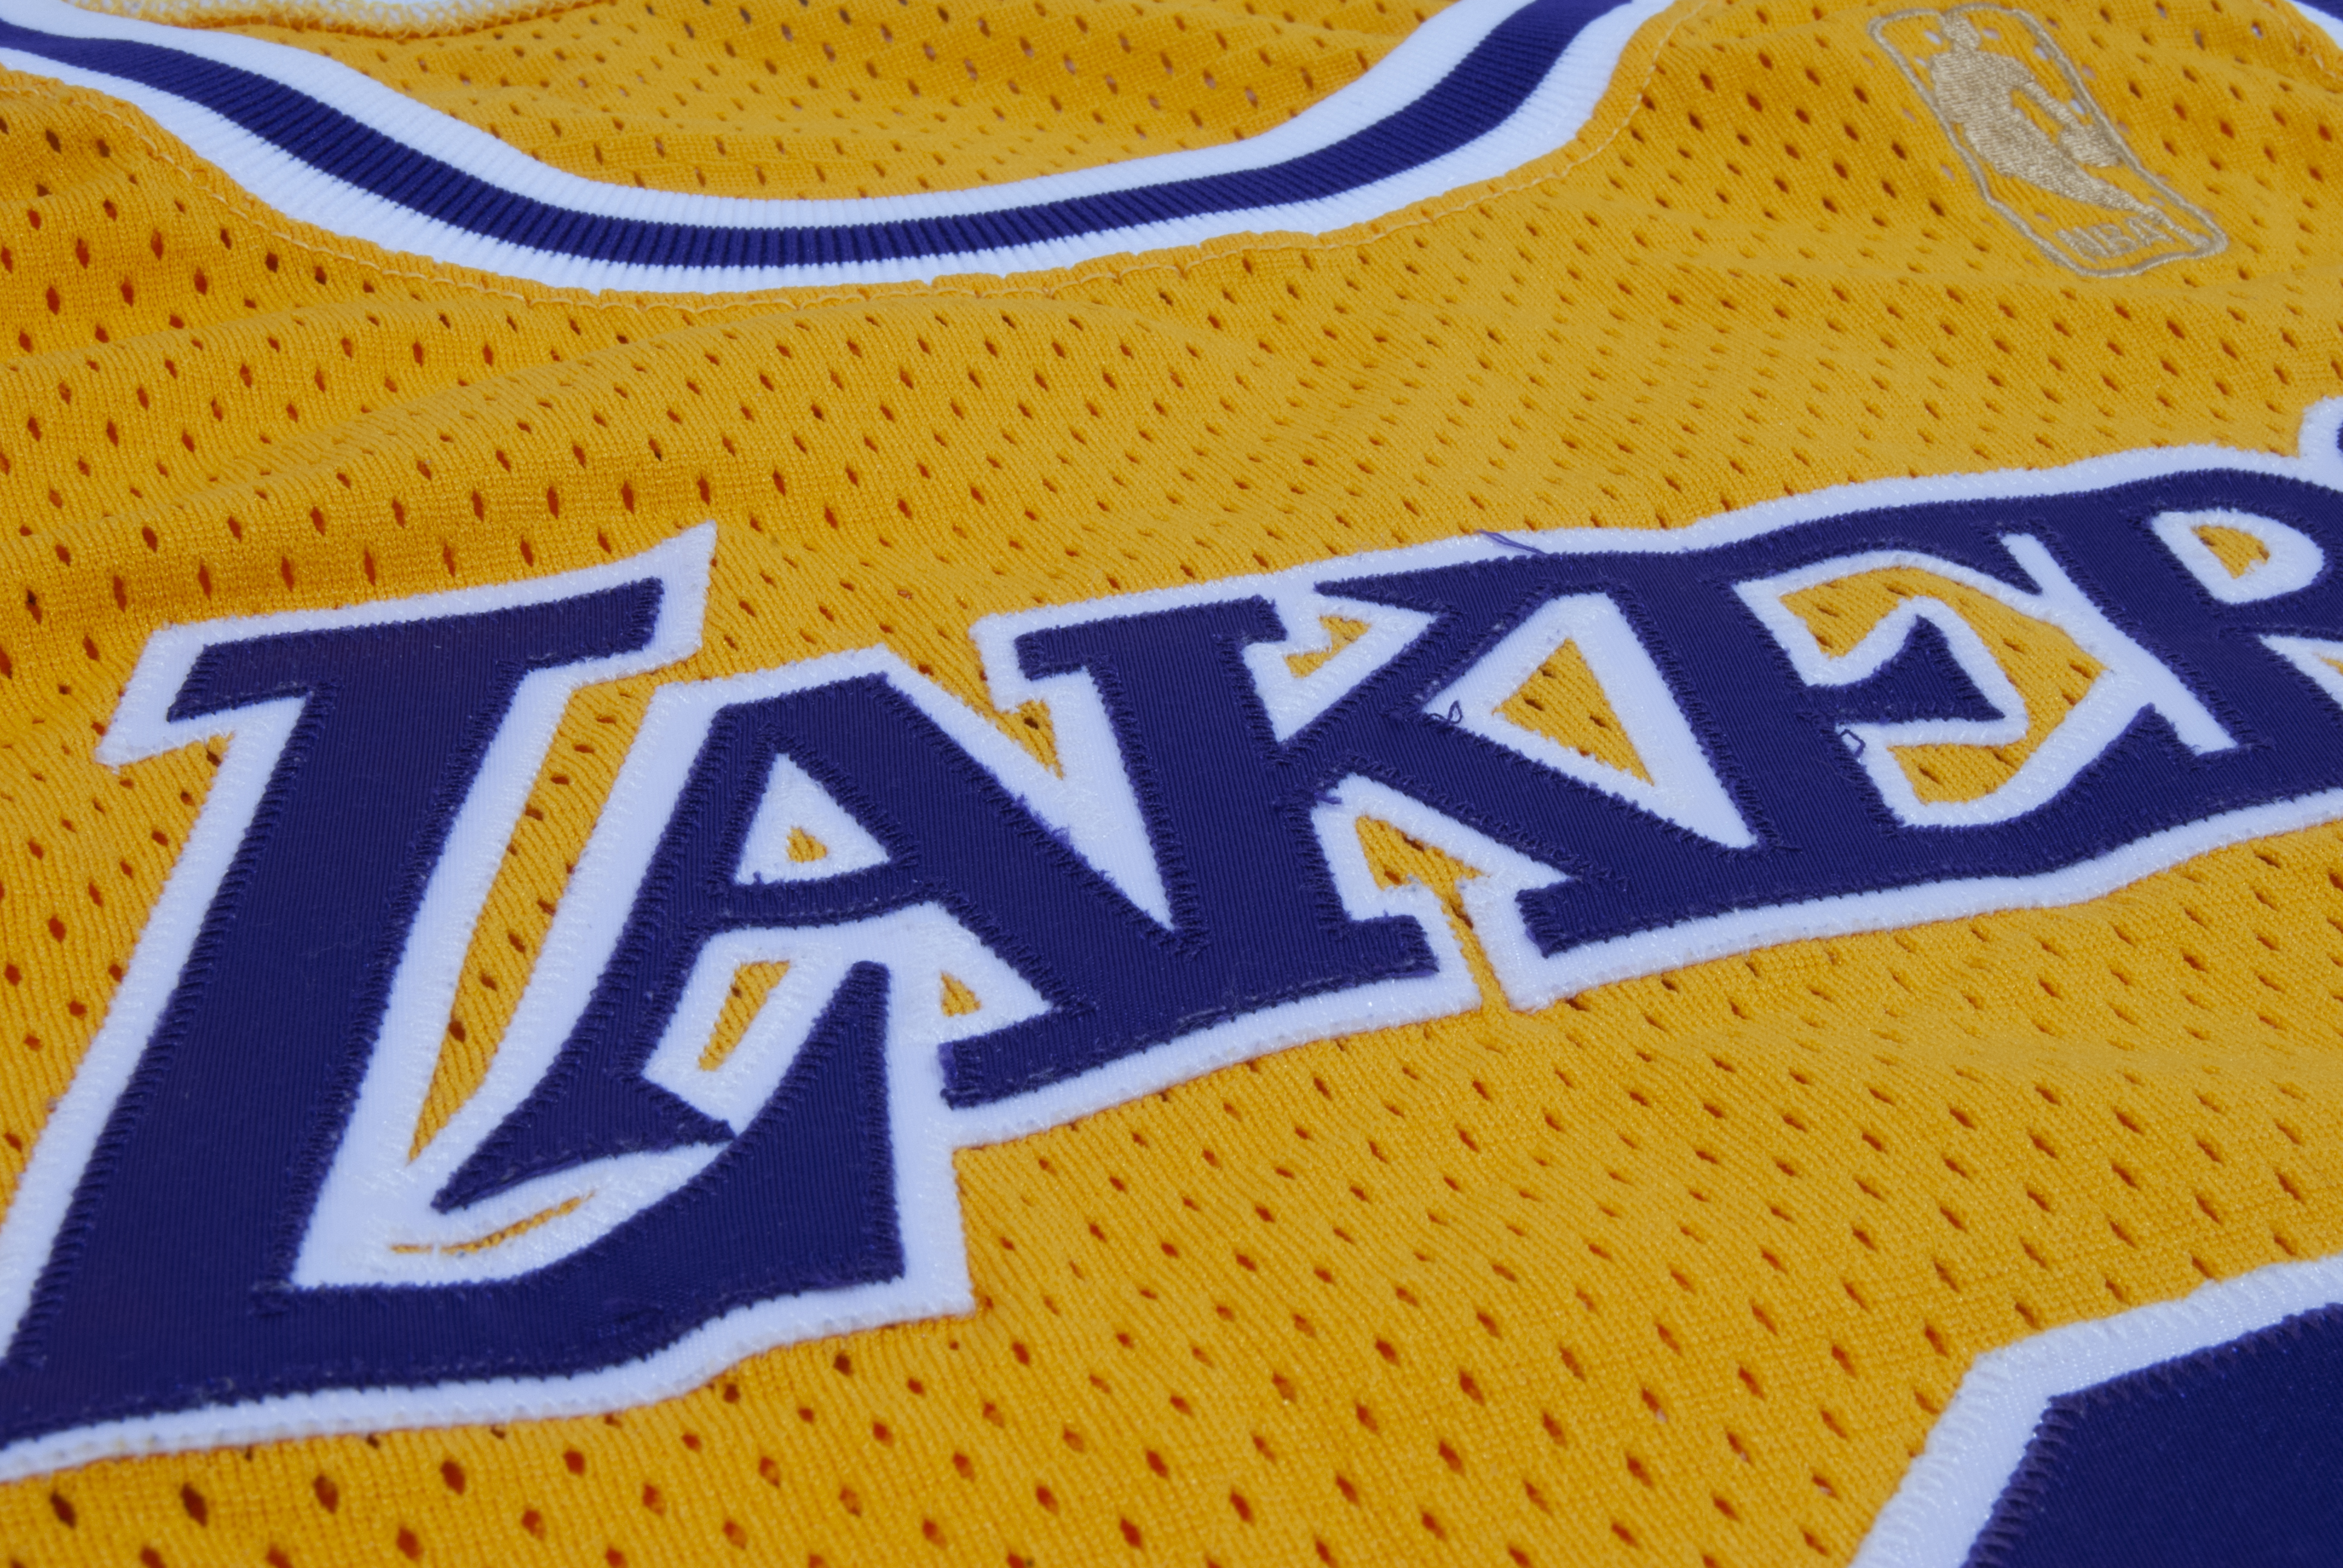 Recently Uncovered 1996-97 Kobe Bryant Los Angeles Lakers Game Worn Rookie  Home Jersey Photomatched to Five Games Incl. Two Playoff Games - ONLY KNOWN KOBE  ROOKIE SEASON PLAYOFFS MATCHED JERSEY! - RESOLUTION